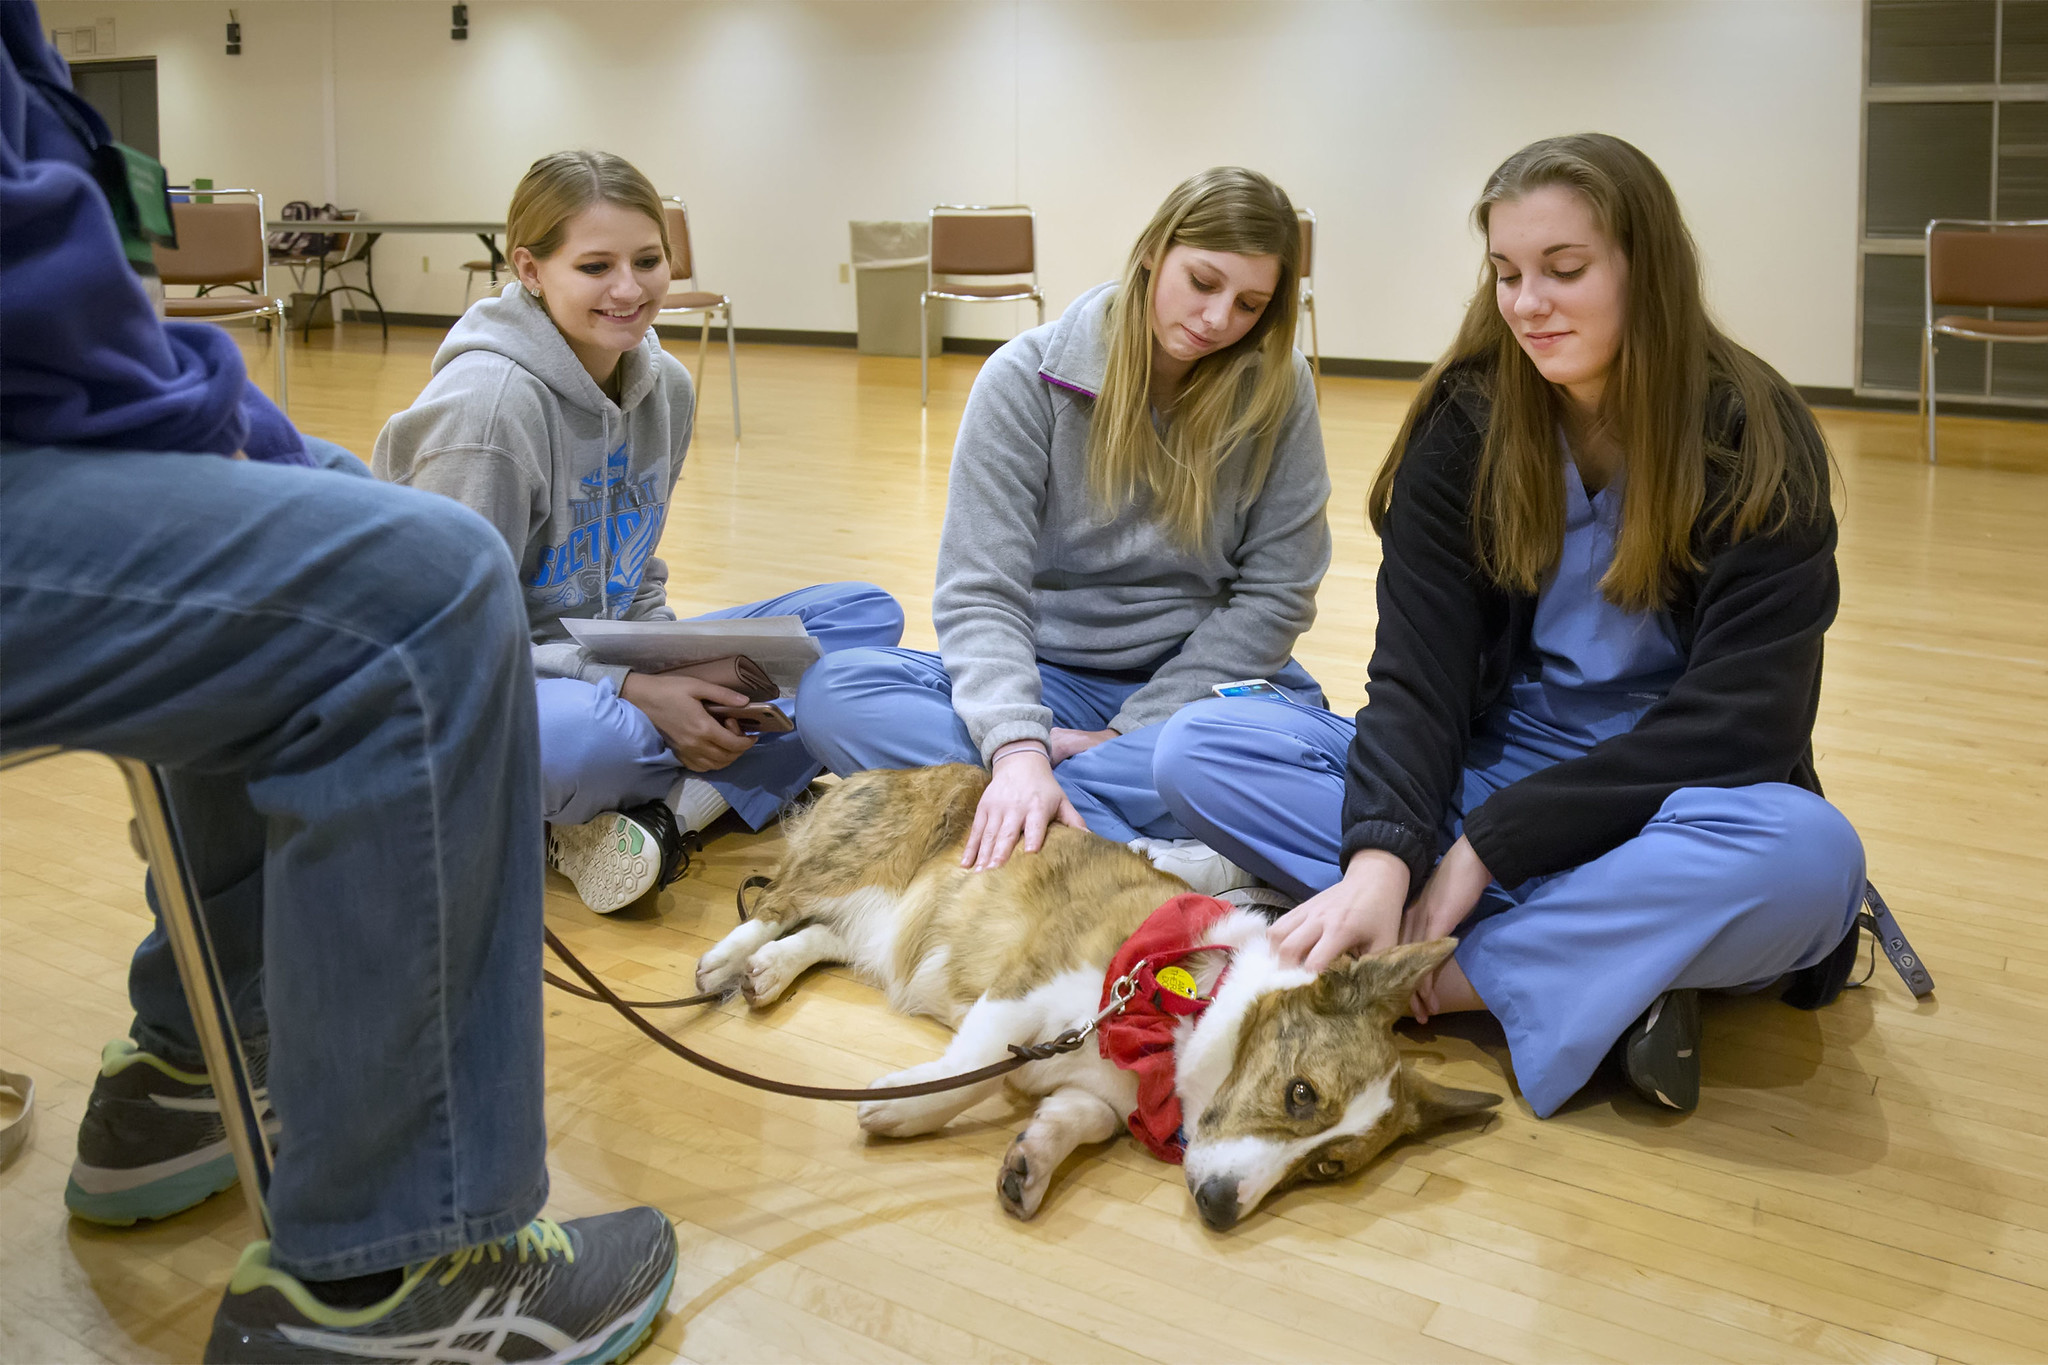 Lewis and Clark students take a time out from finals week to play with a therapy dog at a relaxation event on campus in 2019. L&C file photo.